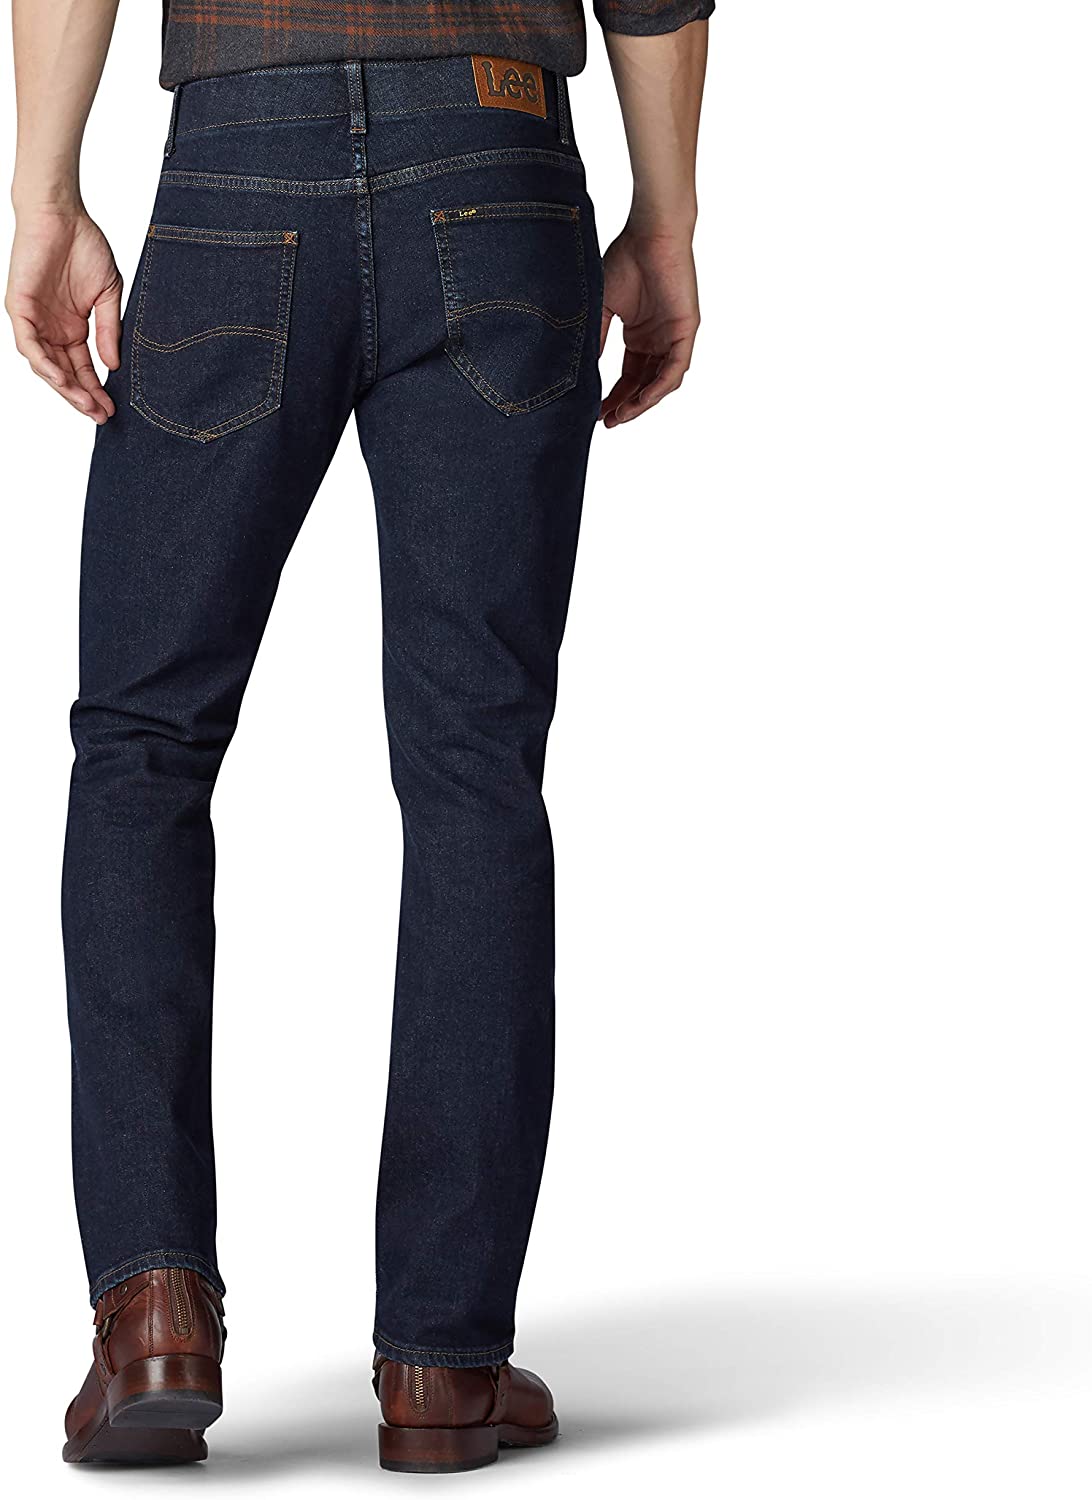 LEE Men's Big & Tall Modern Series Extreme Motion Straight Fit Jean | eBay